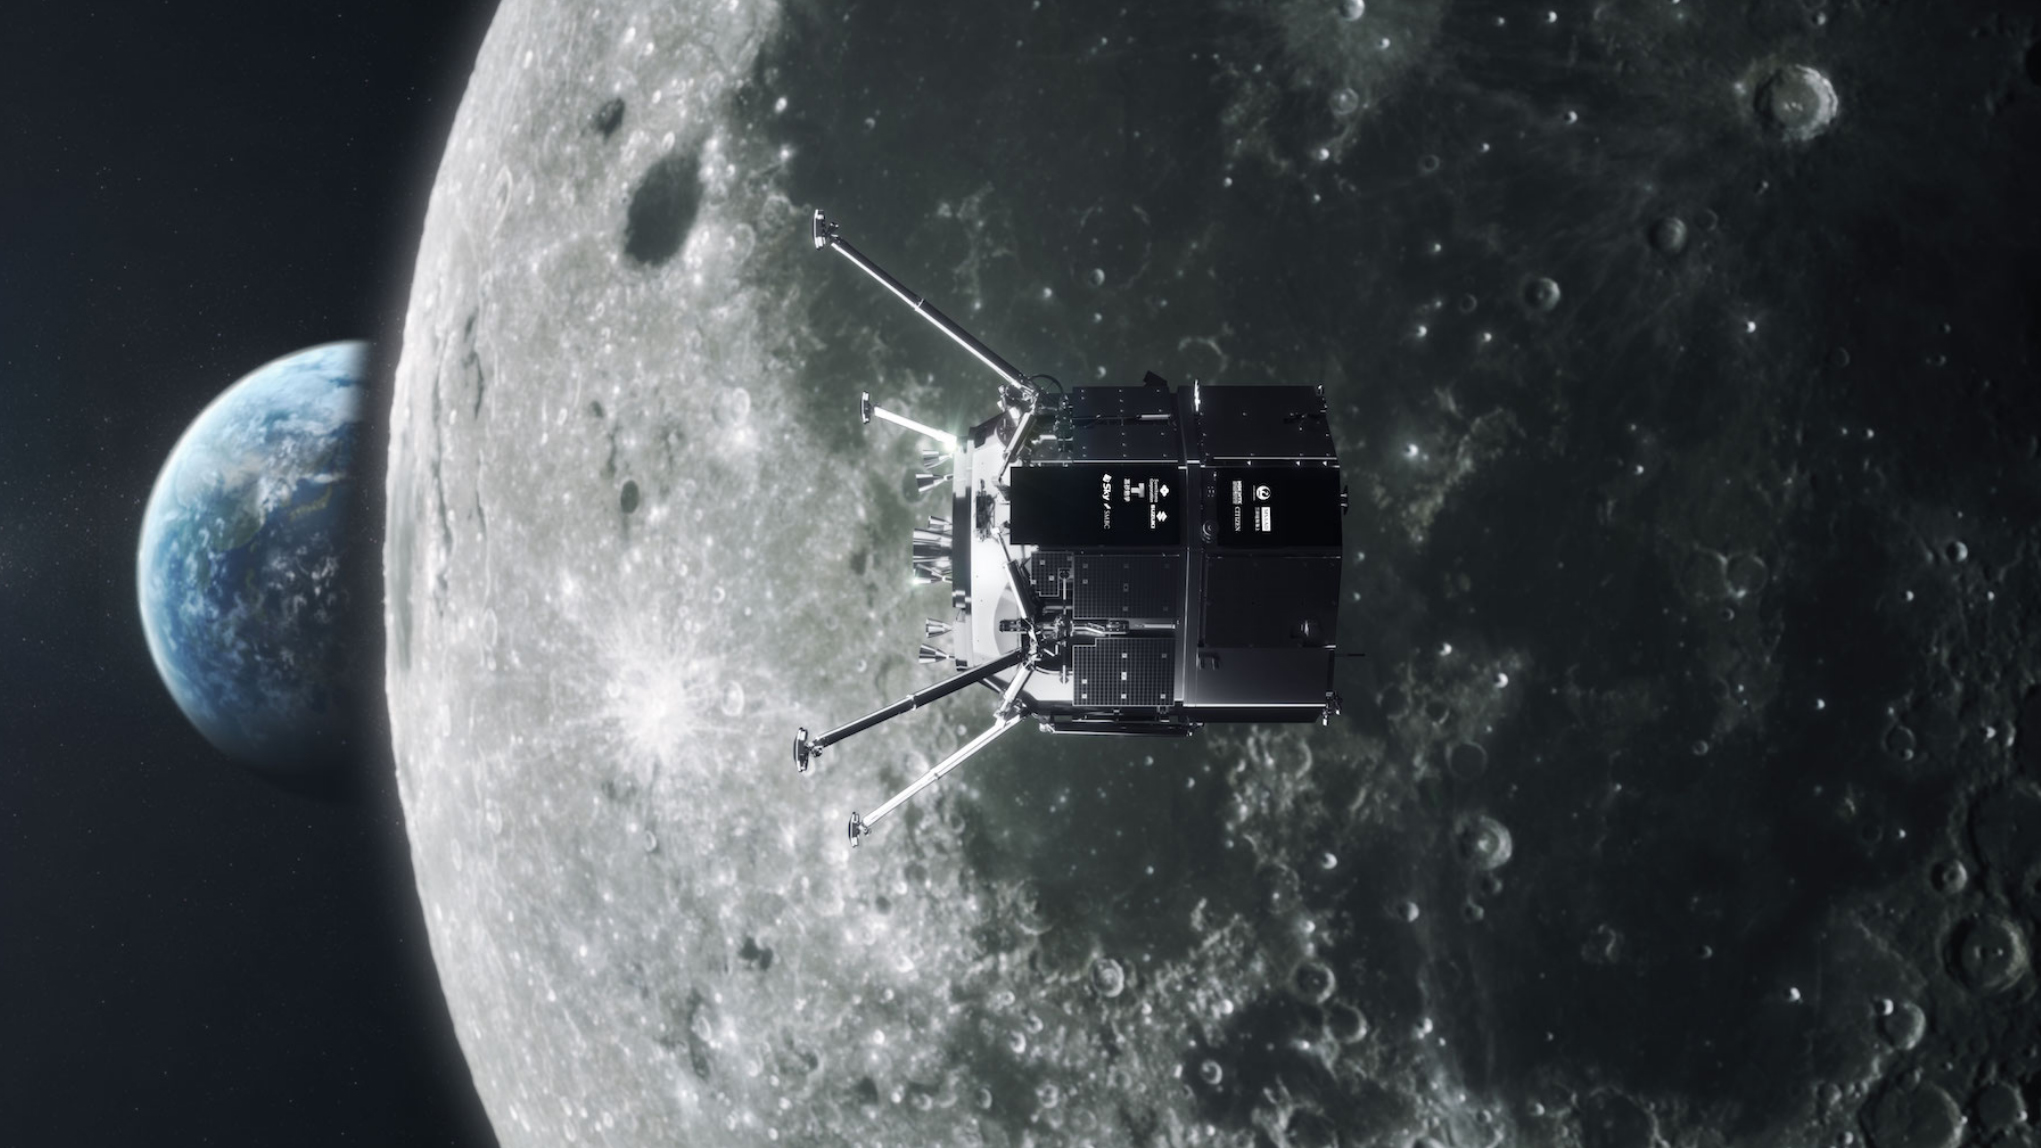 Private Japanese lunar lander performs 2nd major maneuver on its way to the moon